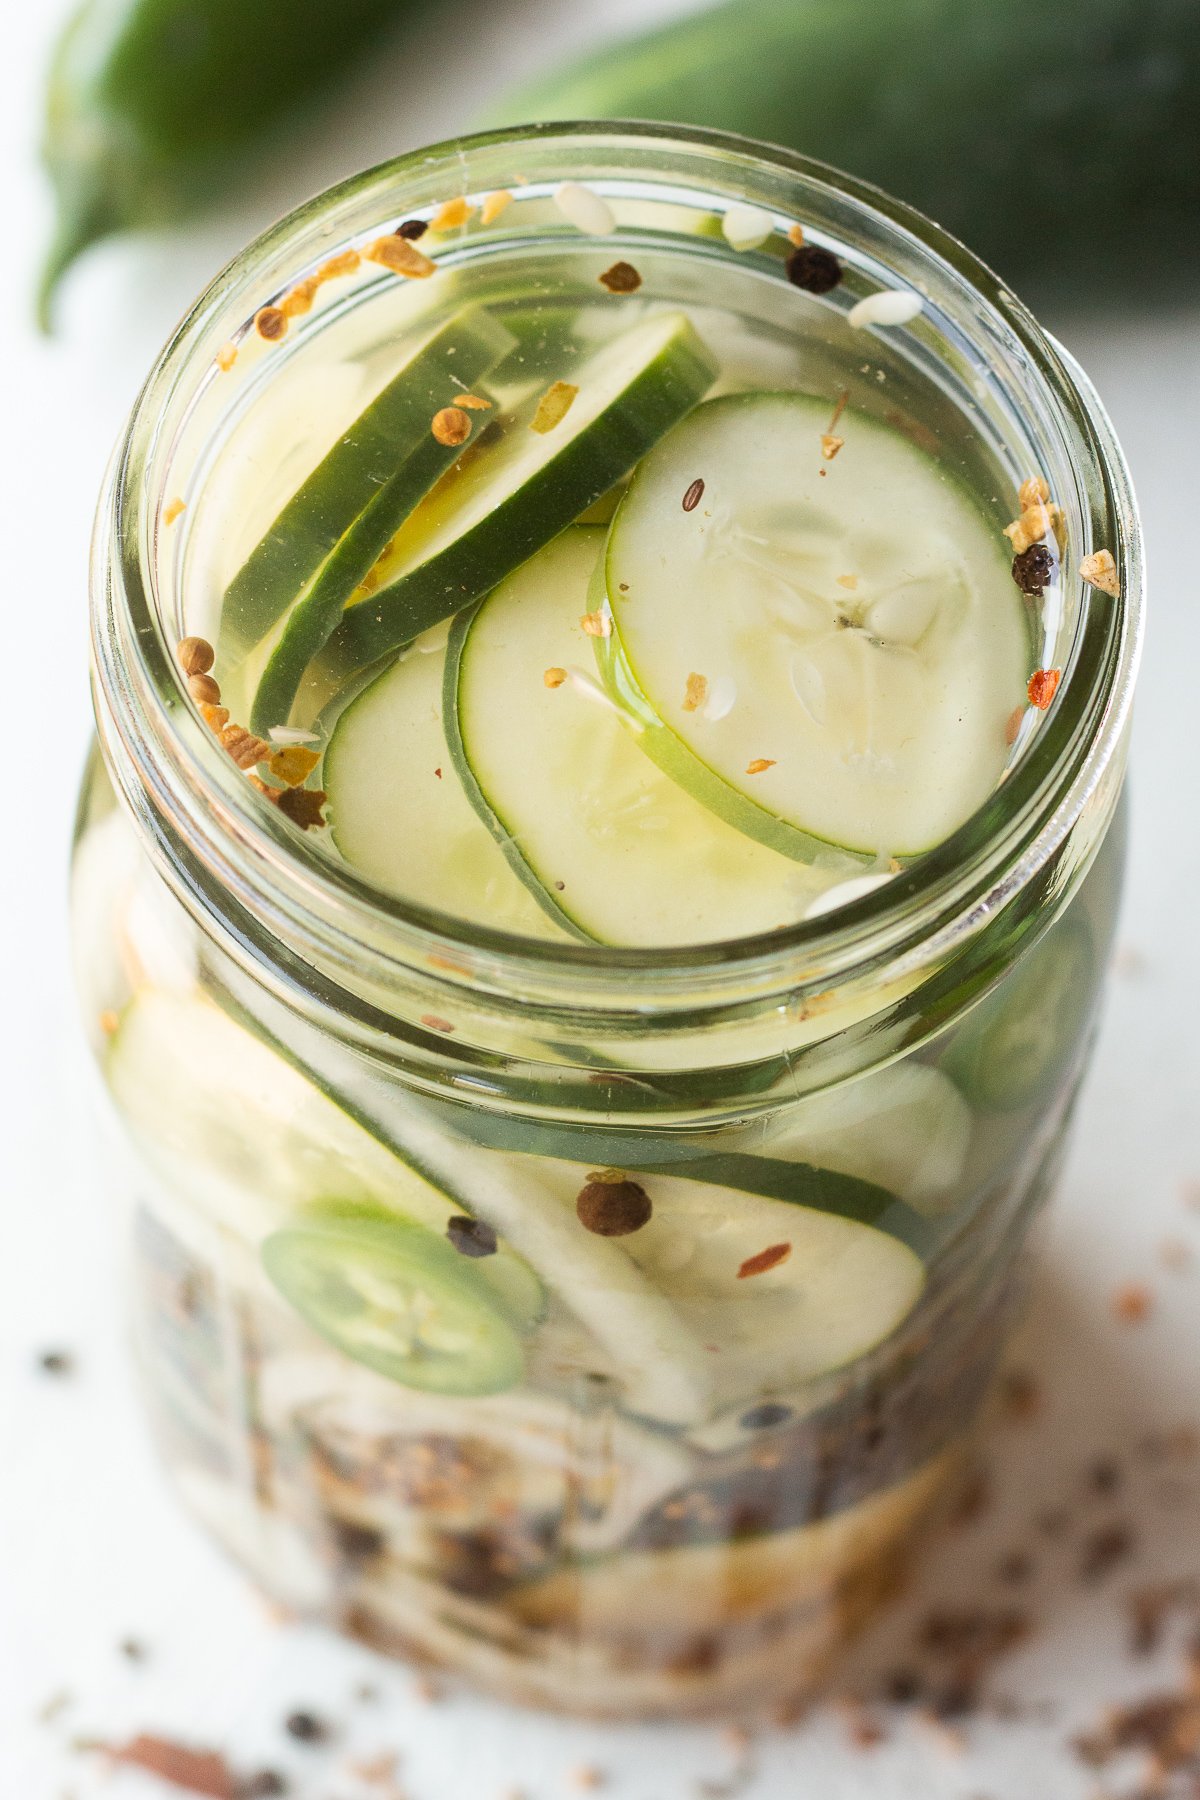 Mason jar filled with sweet pickles.